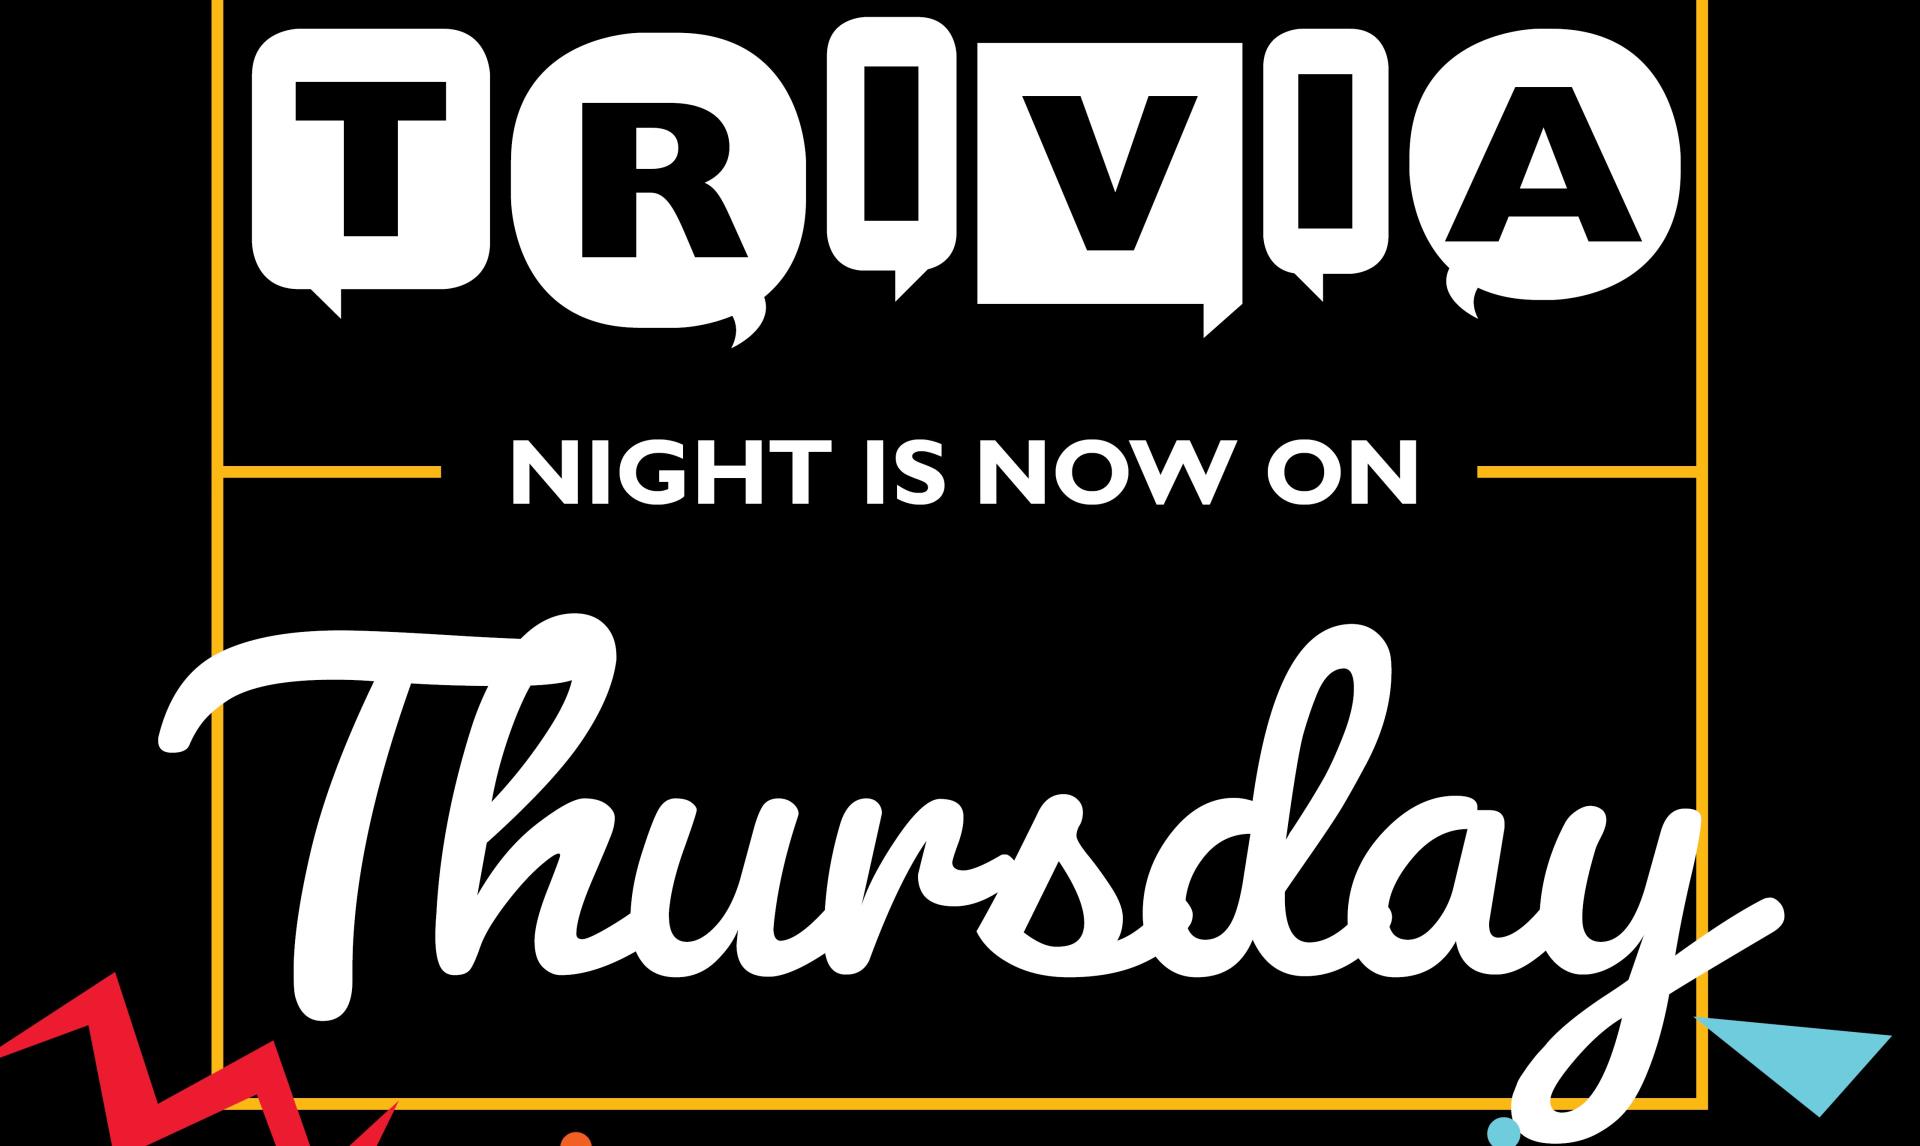 Trivia is changing to Thursdays!